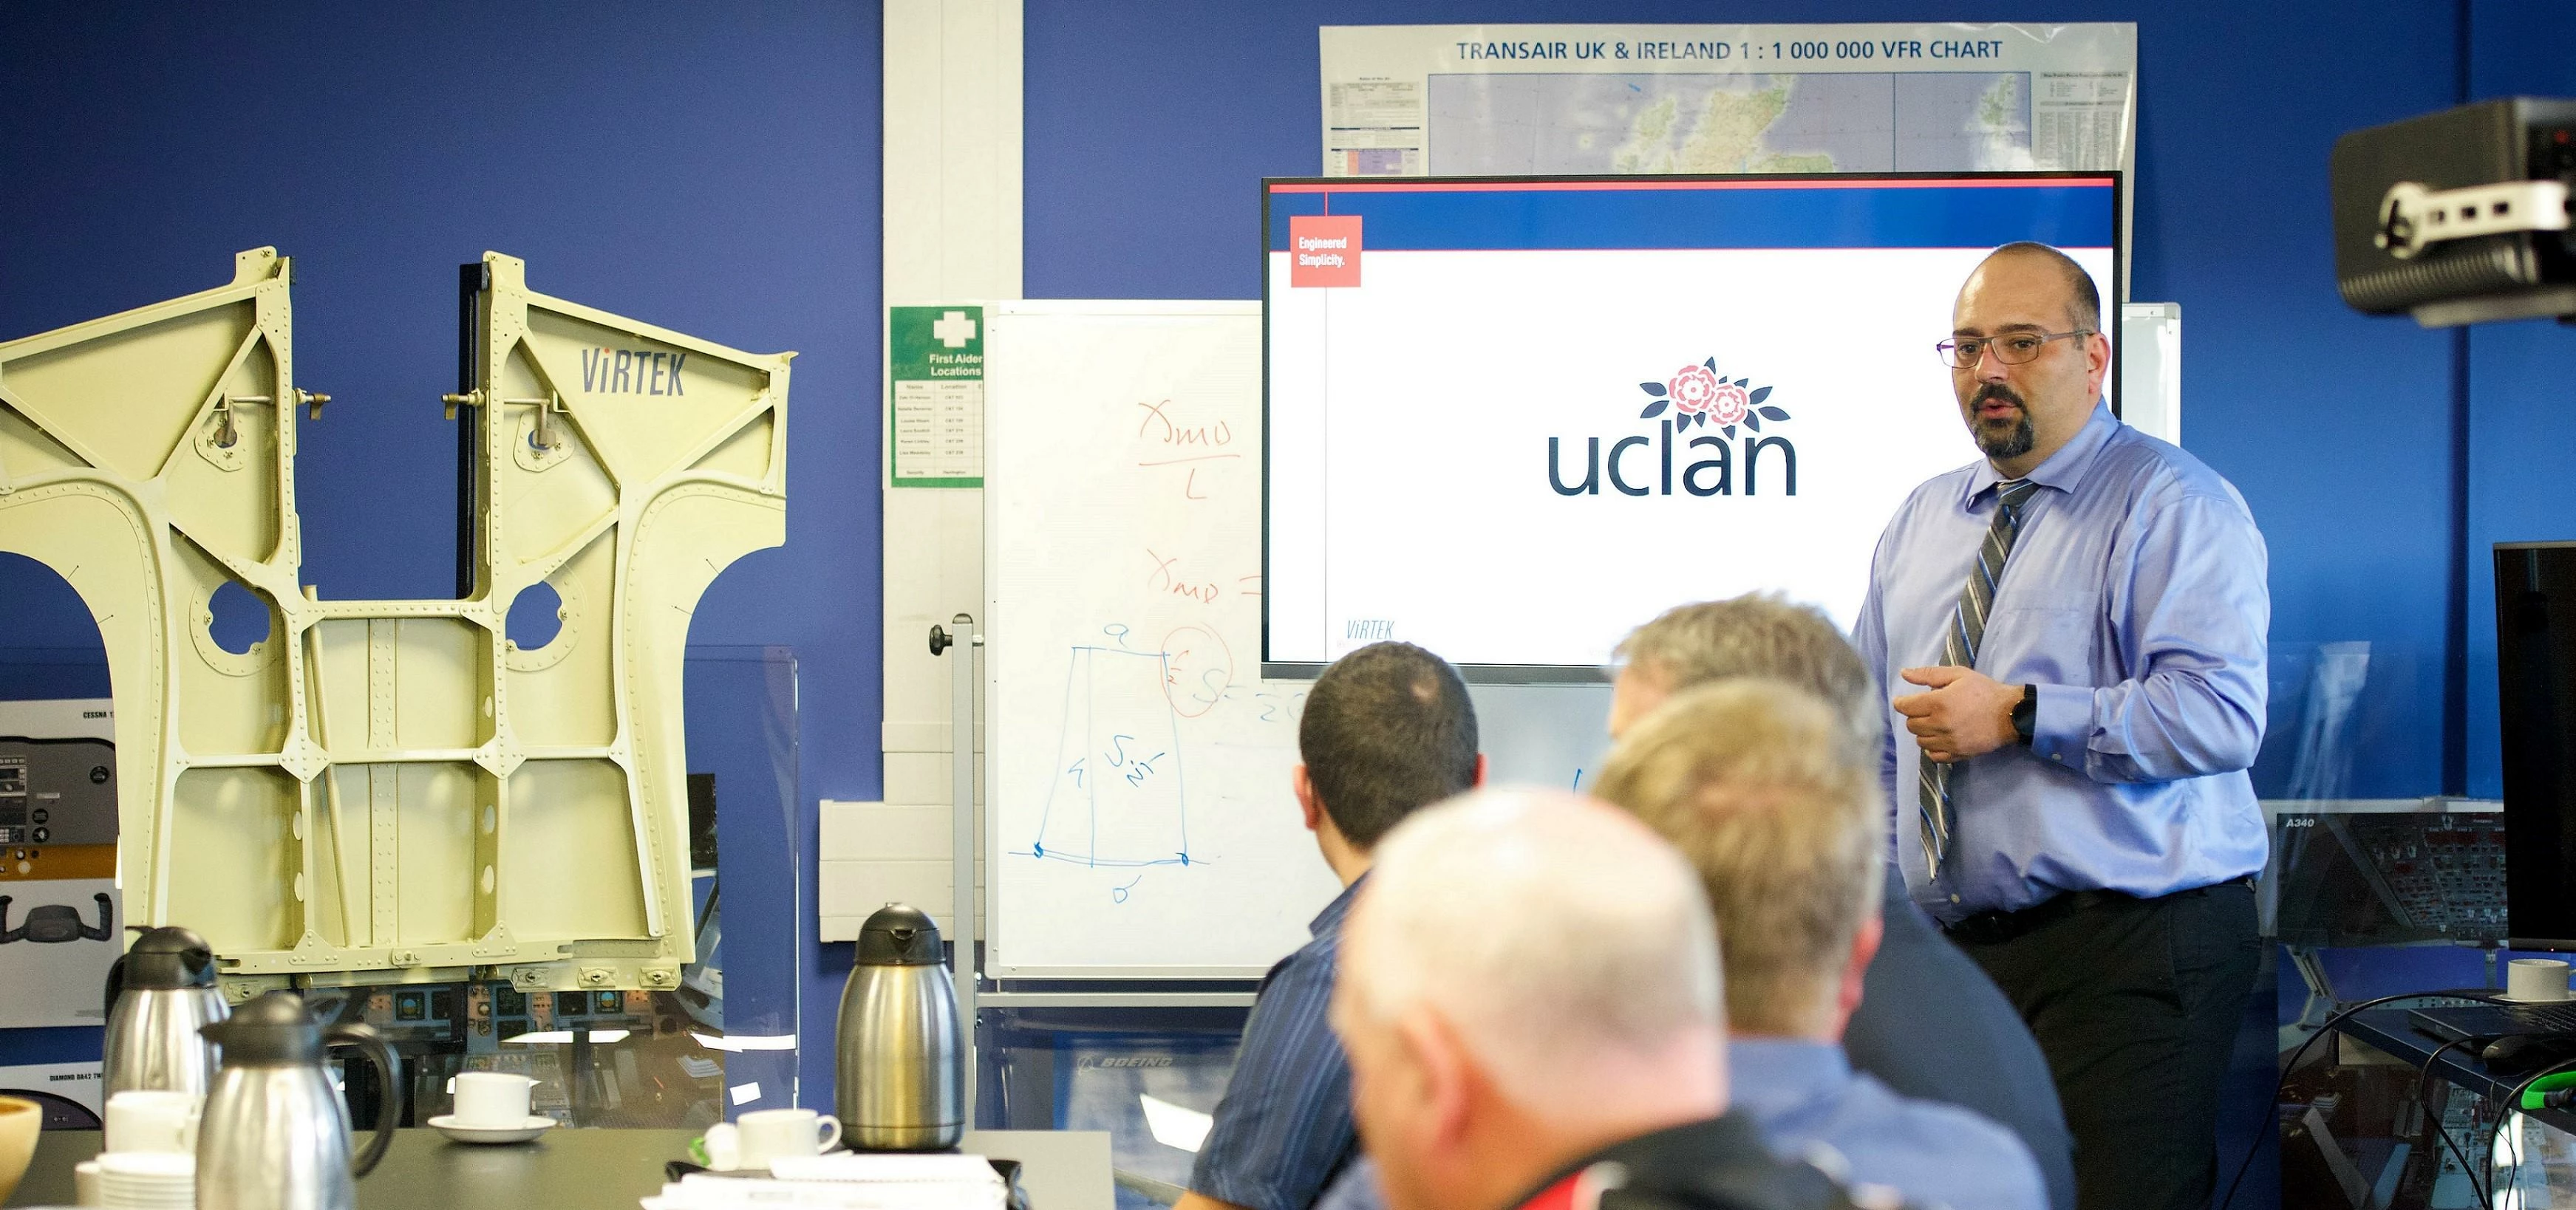 The Vision Positioning System was launched at UCLan